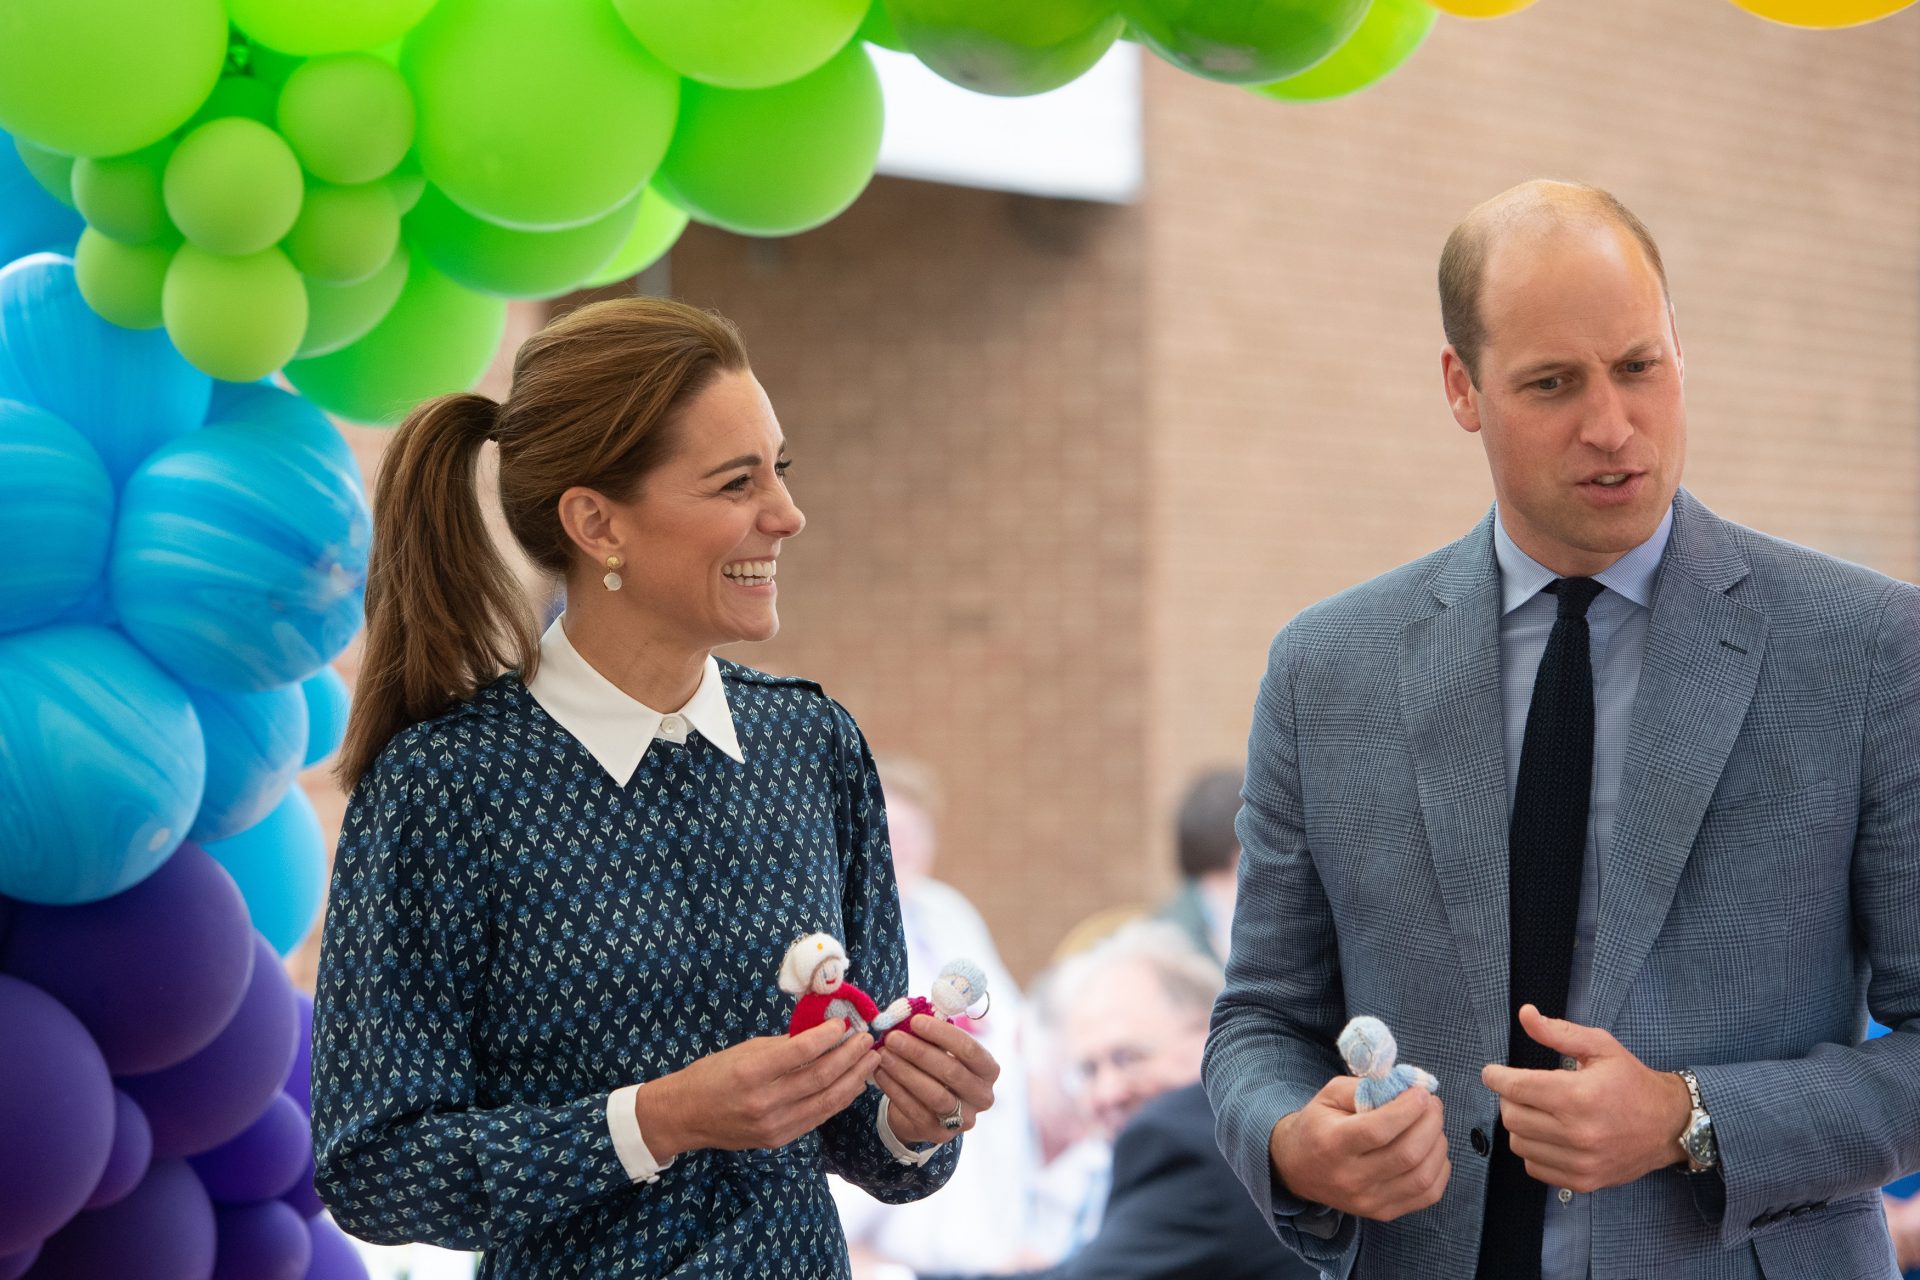 Kate Middleton and Prince William Wore Matching Blue to Queen Elizabeth Health facility For a Particular Proceed to